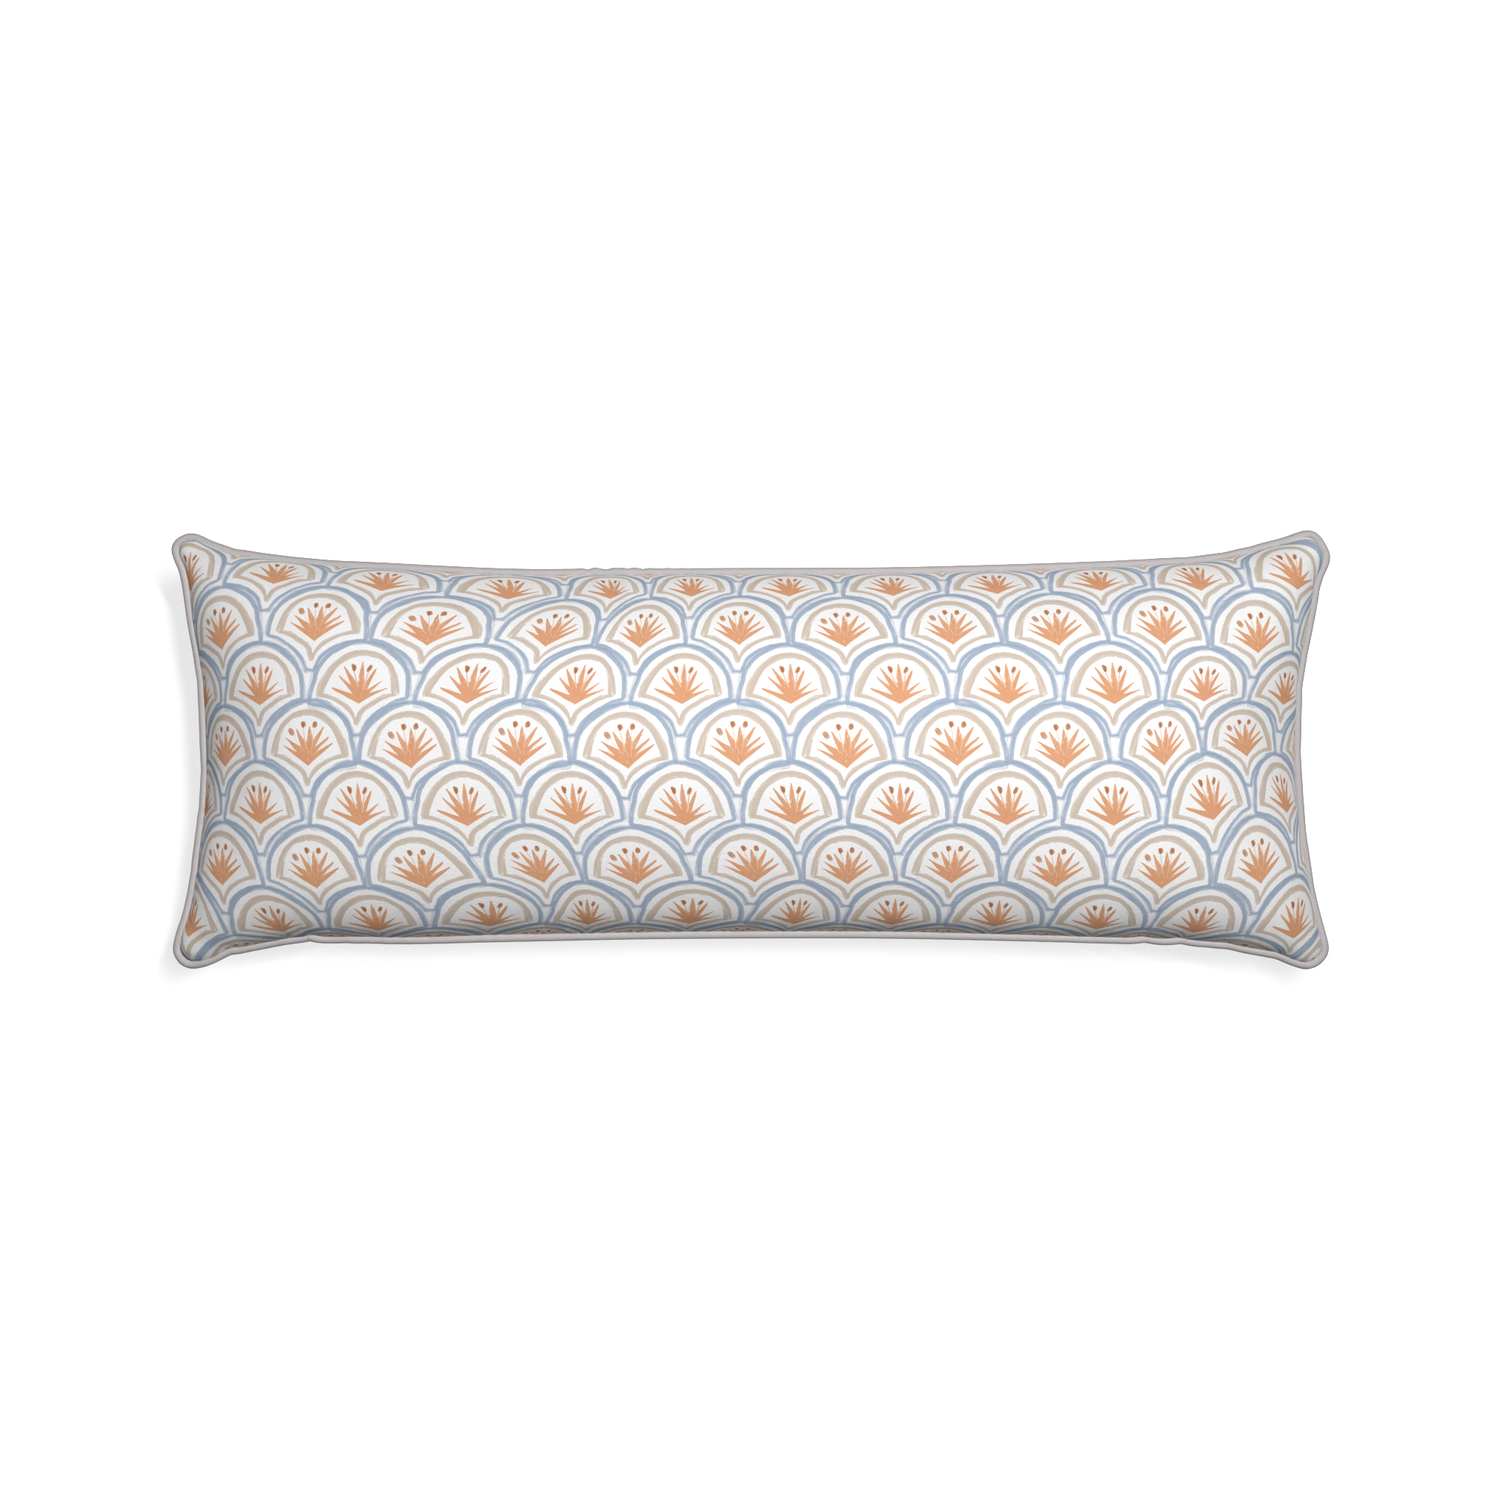 Xl-lumbar thatcher apricot custom art deco palm patternpillow with pebble piping on white background